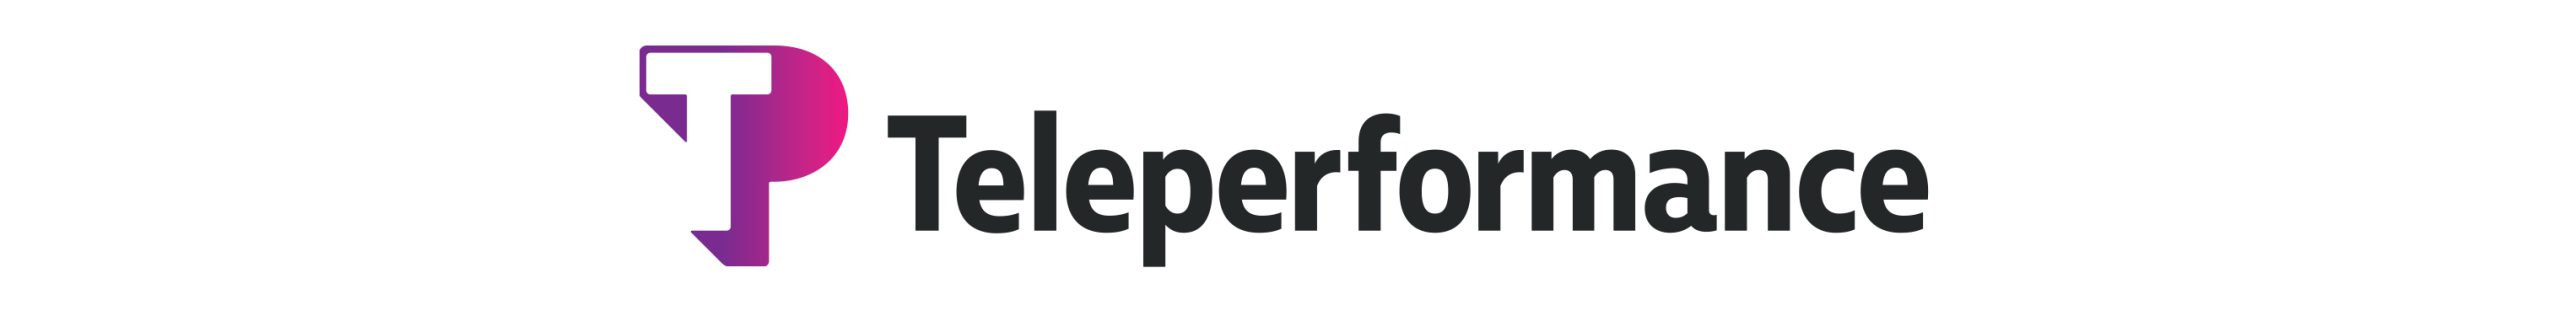 In&Out sogg. Teleperformance Masthead